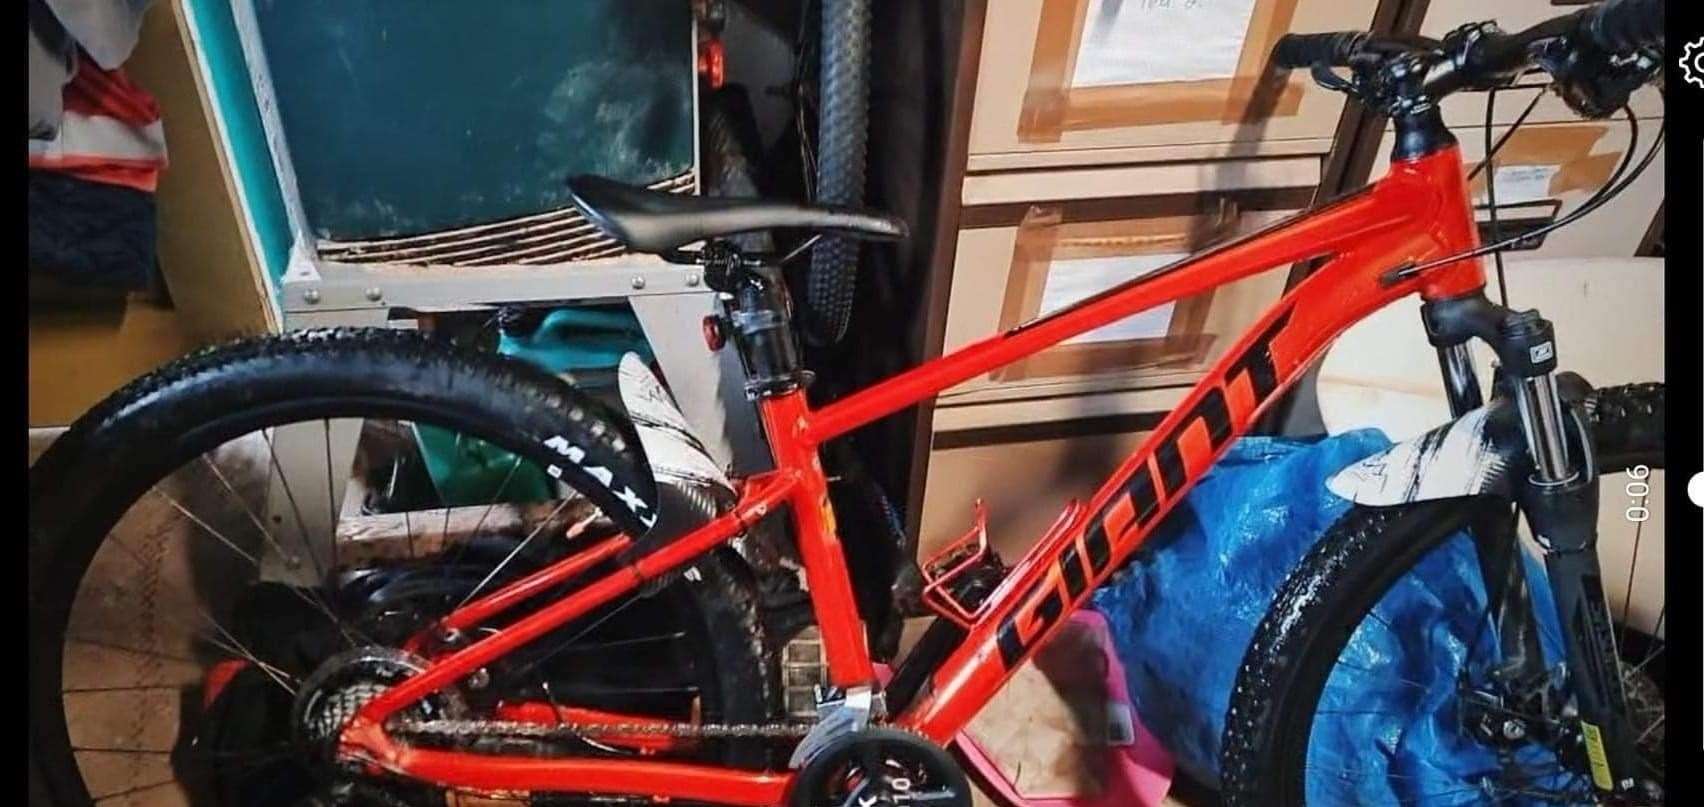 Police want to know the whereabouts of the mountain bike.